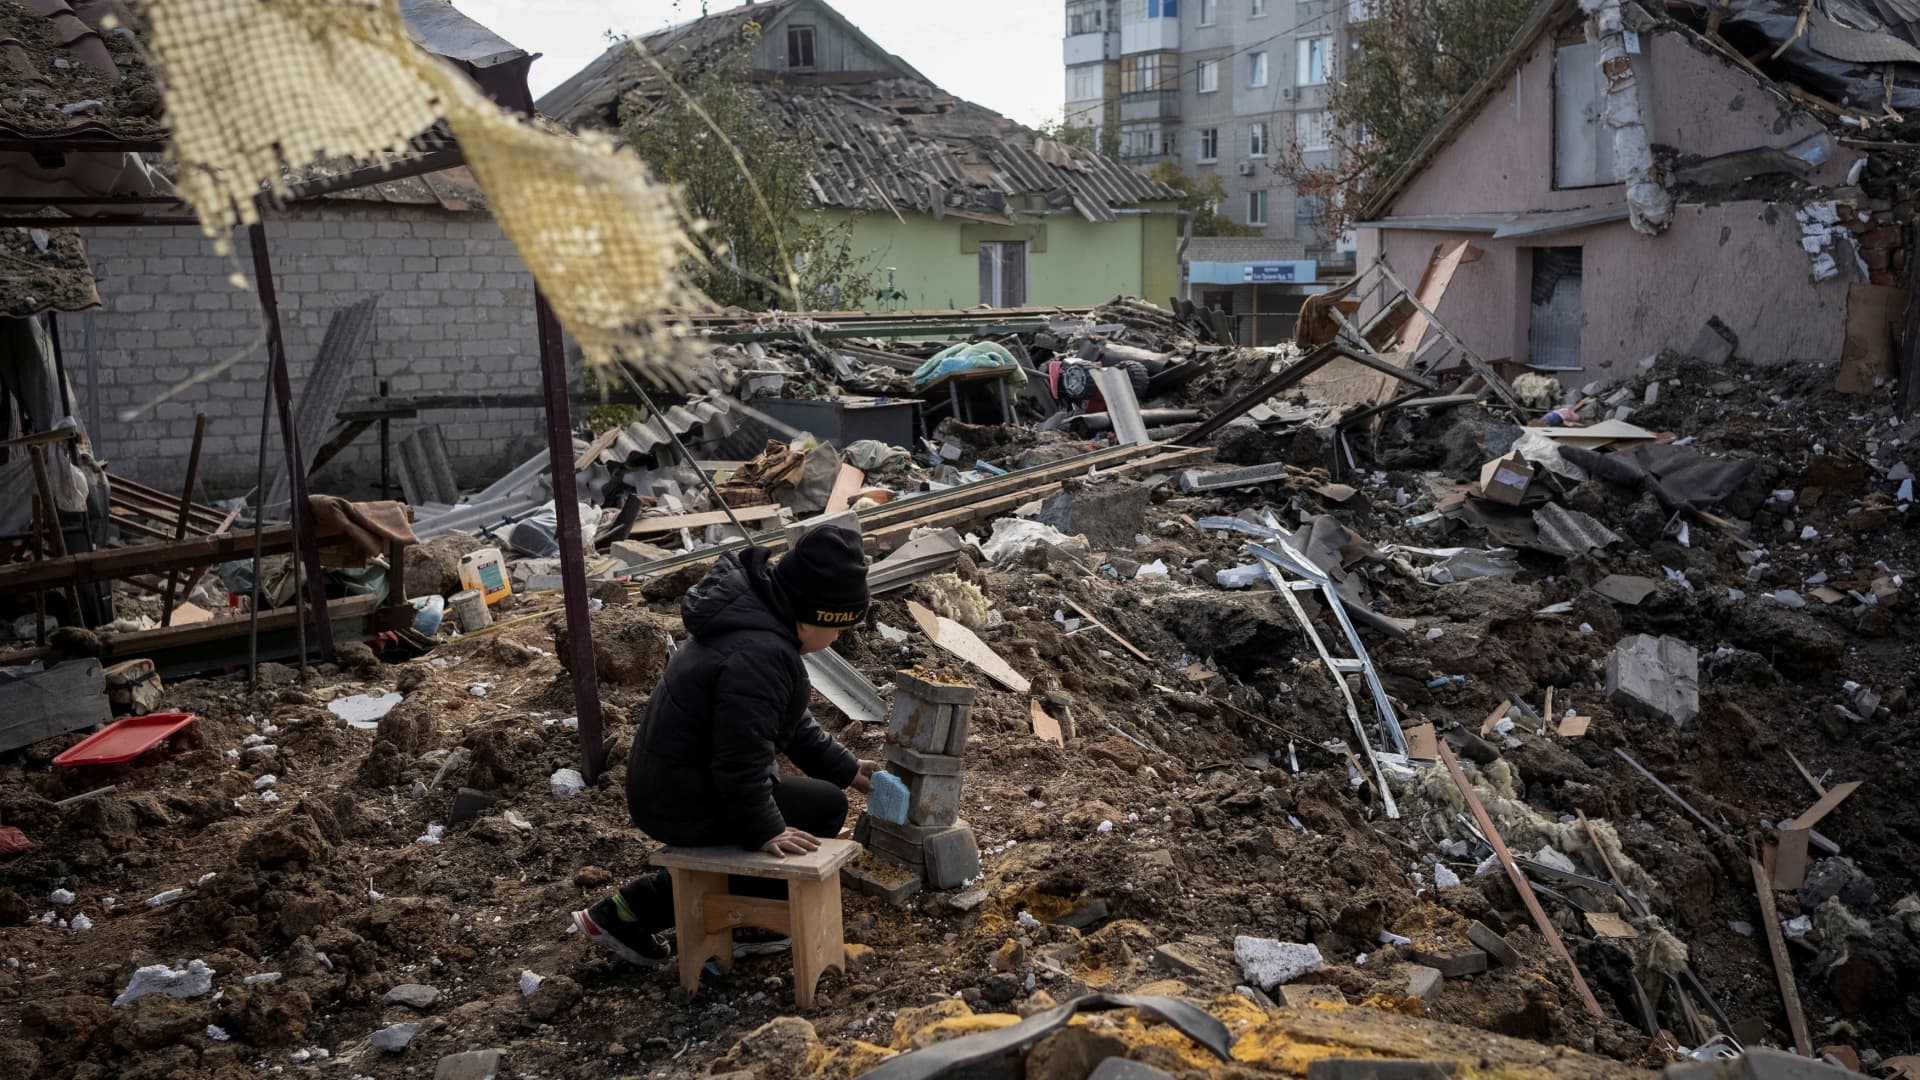 A boy plays on ruins of his grandmother's house, amid Russia's attack on Ukraine, in Kupiansk, Ukraine October 16, 2022.